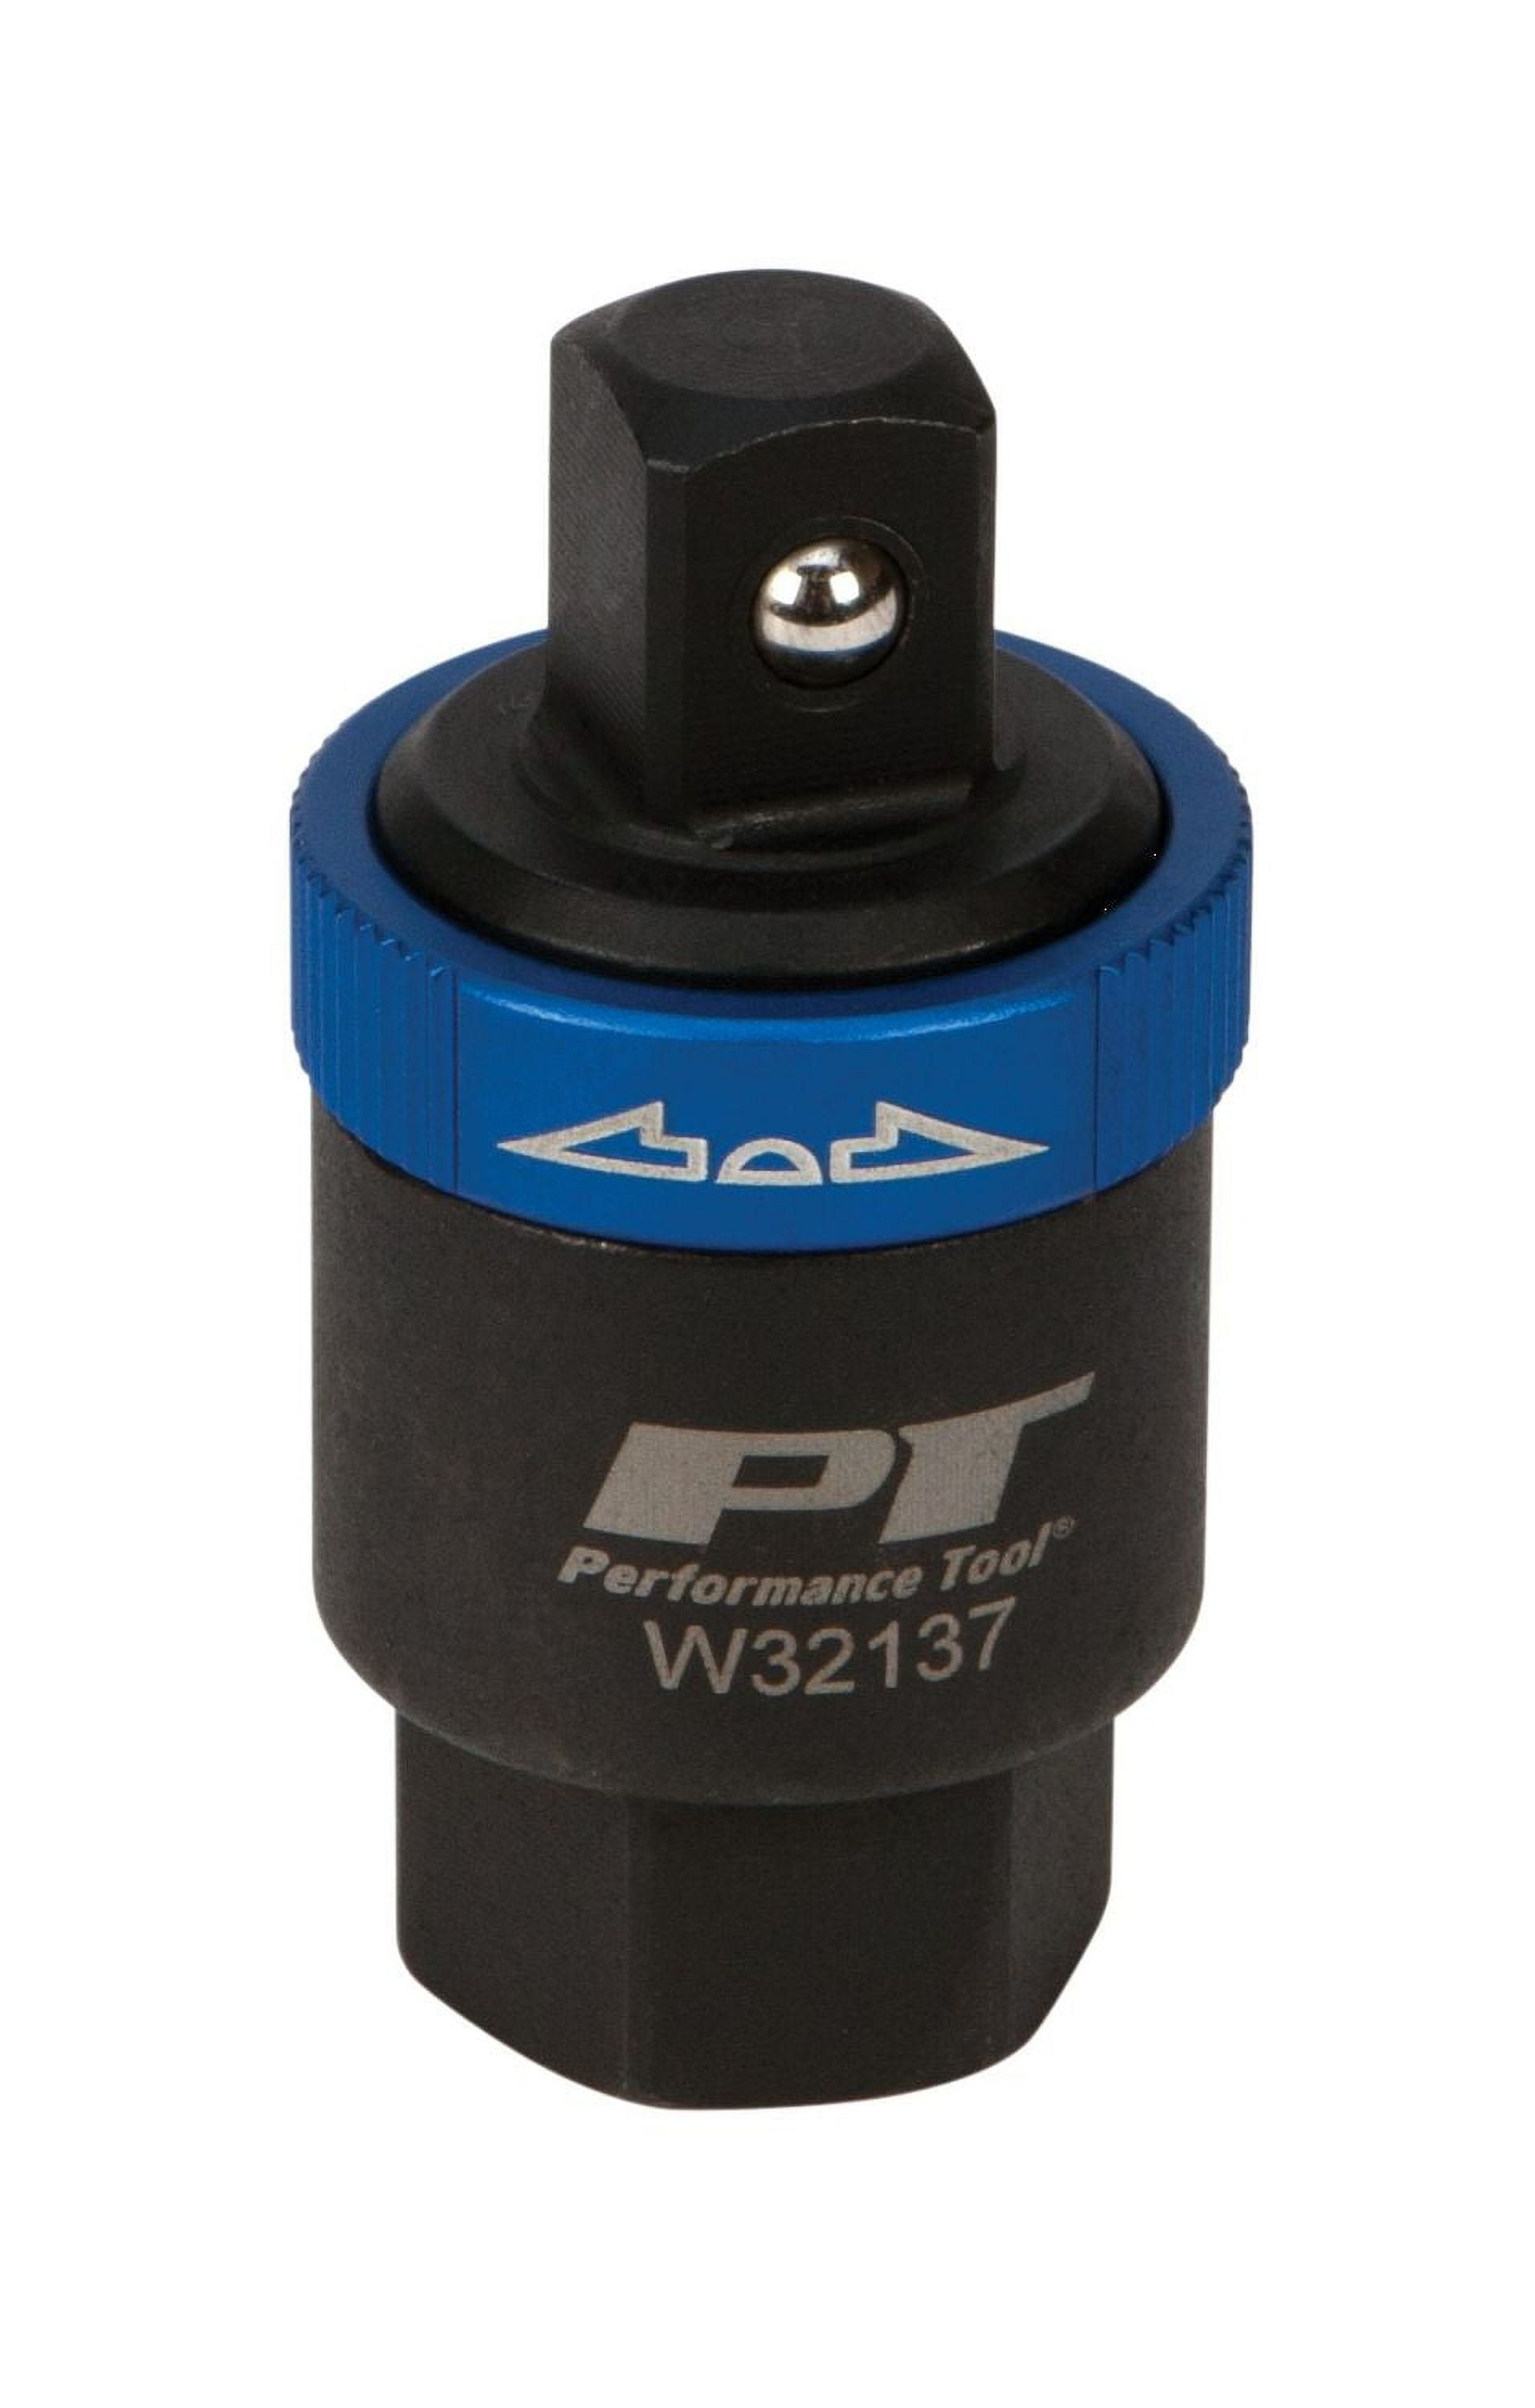 Performance Tool W32137 1/2 Dr. Ratcheting Adapter